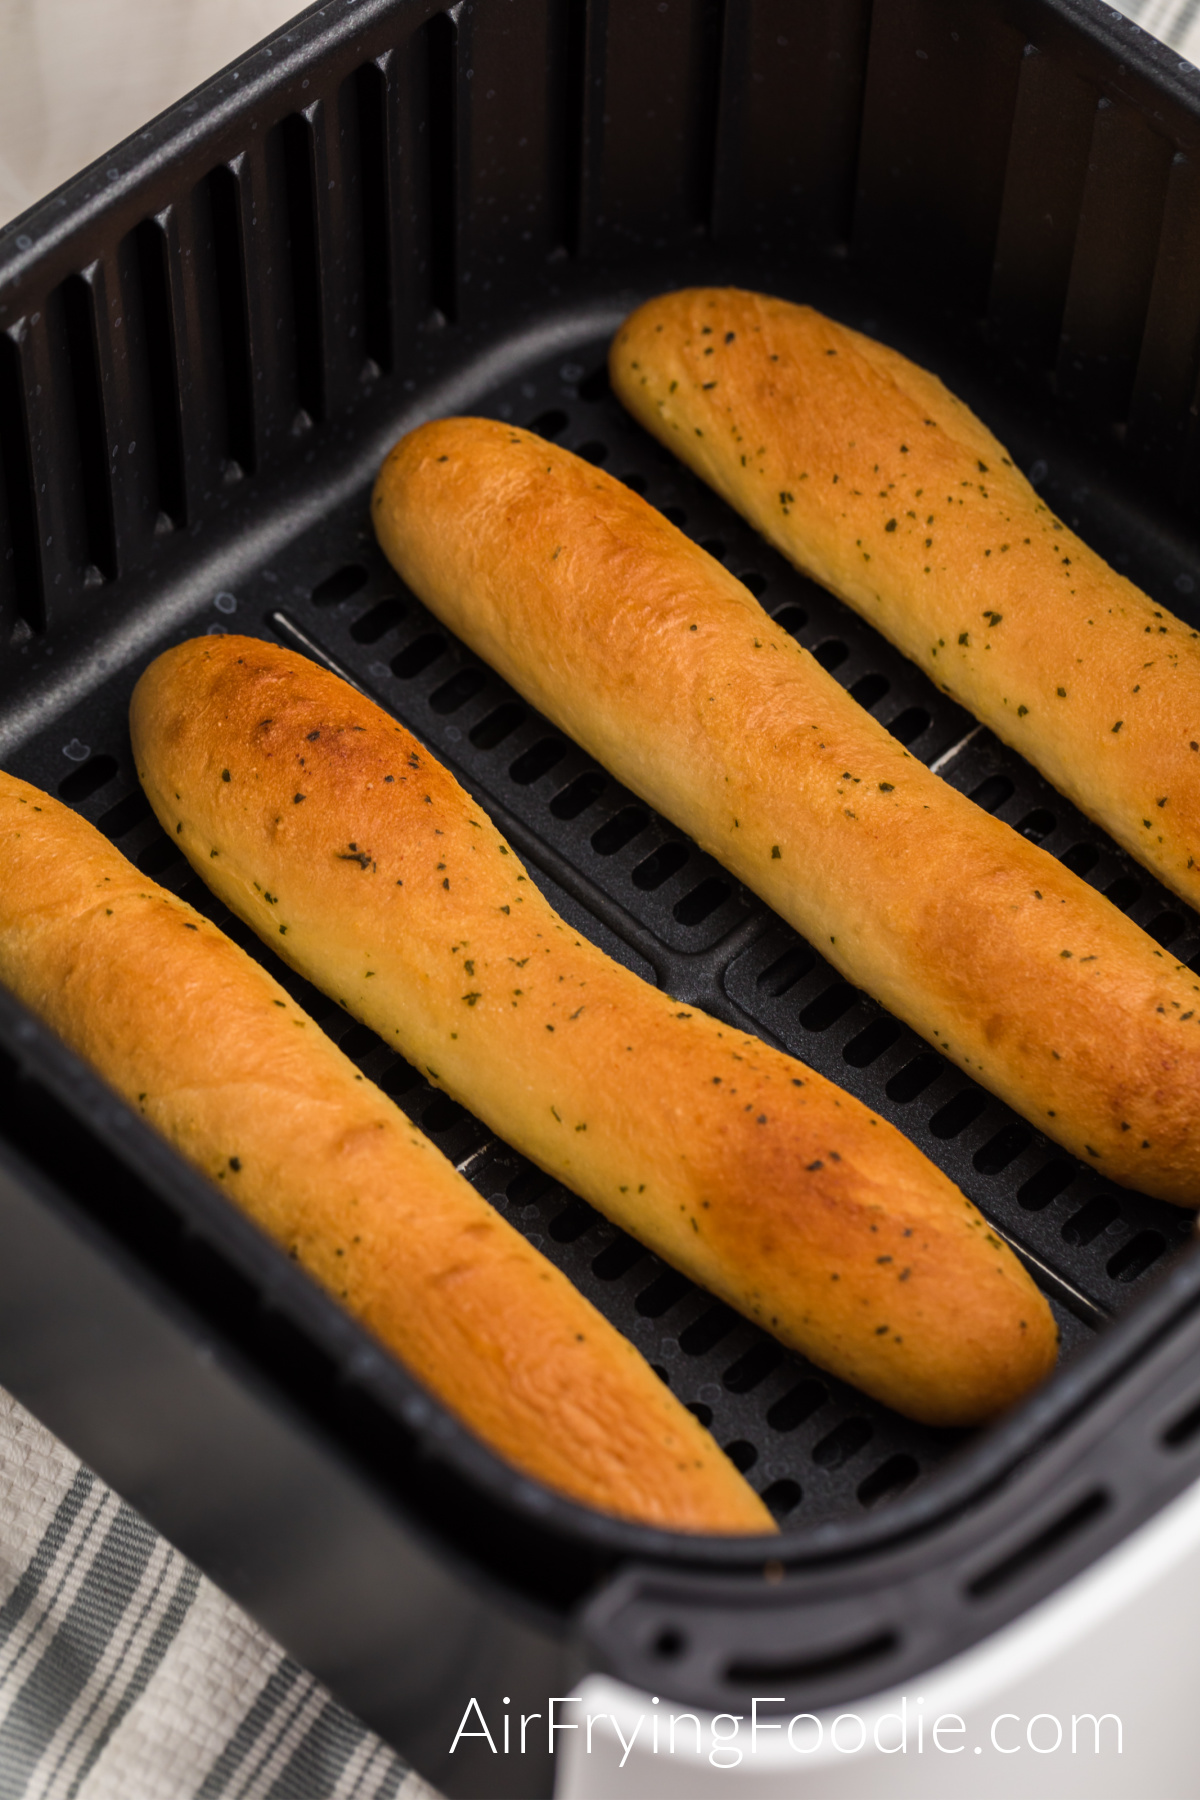 Fully cooked breadsticks in the basket of the air fryer, ready to be removed and served. 